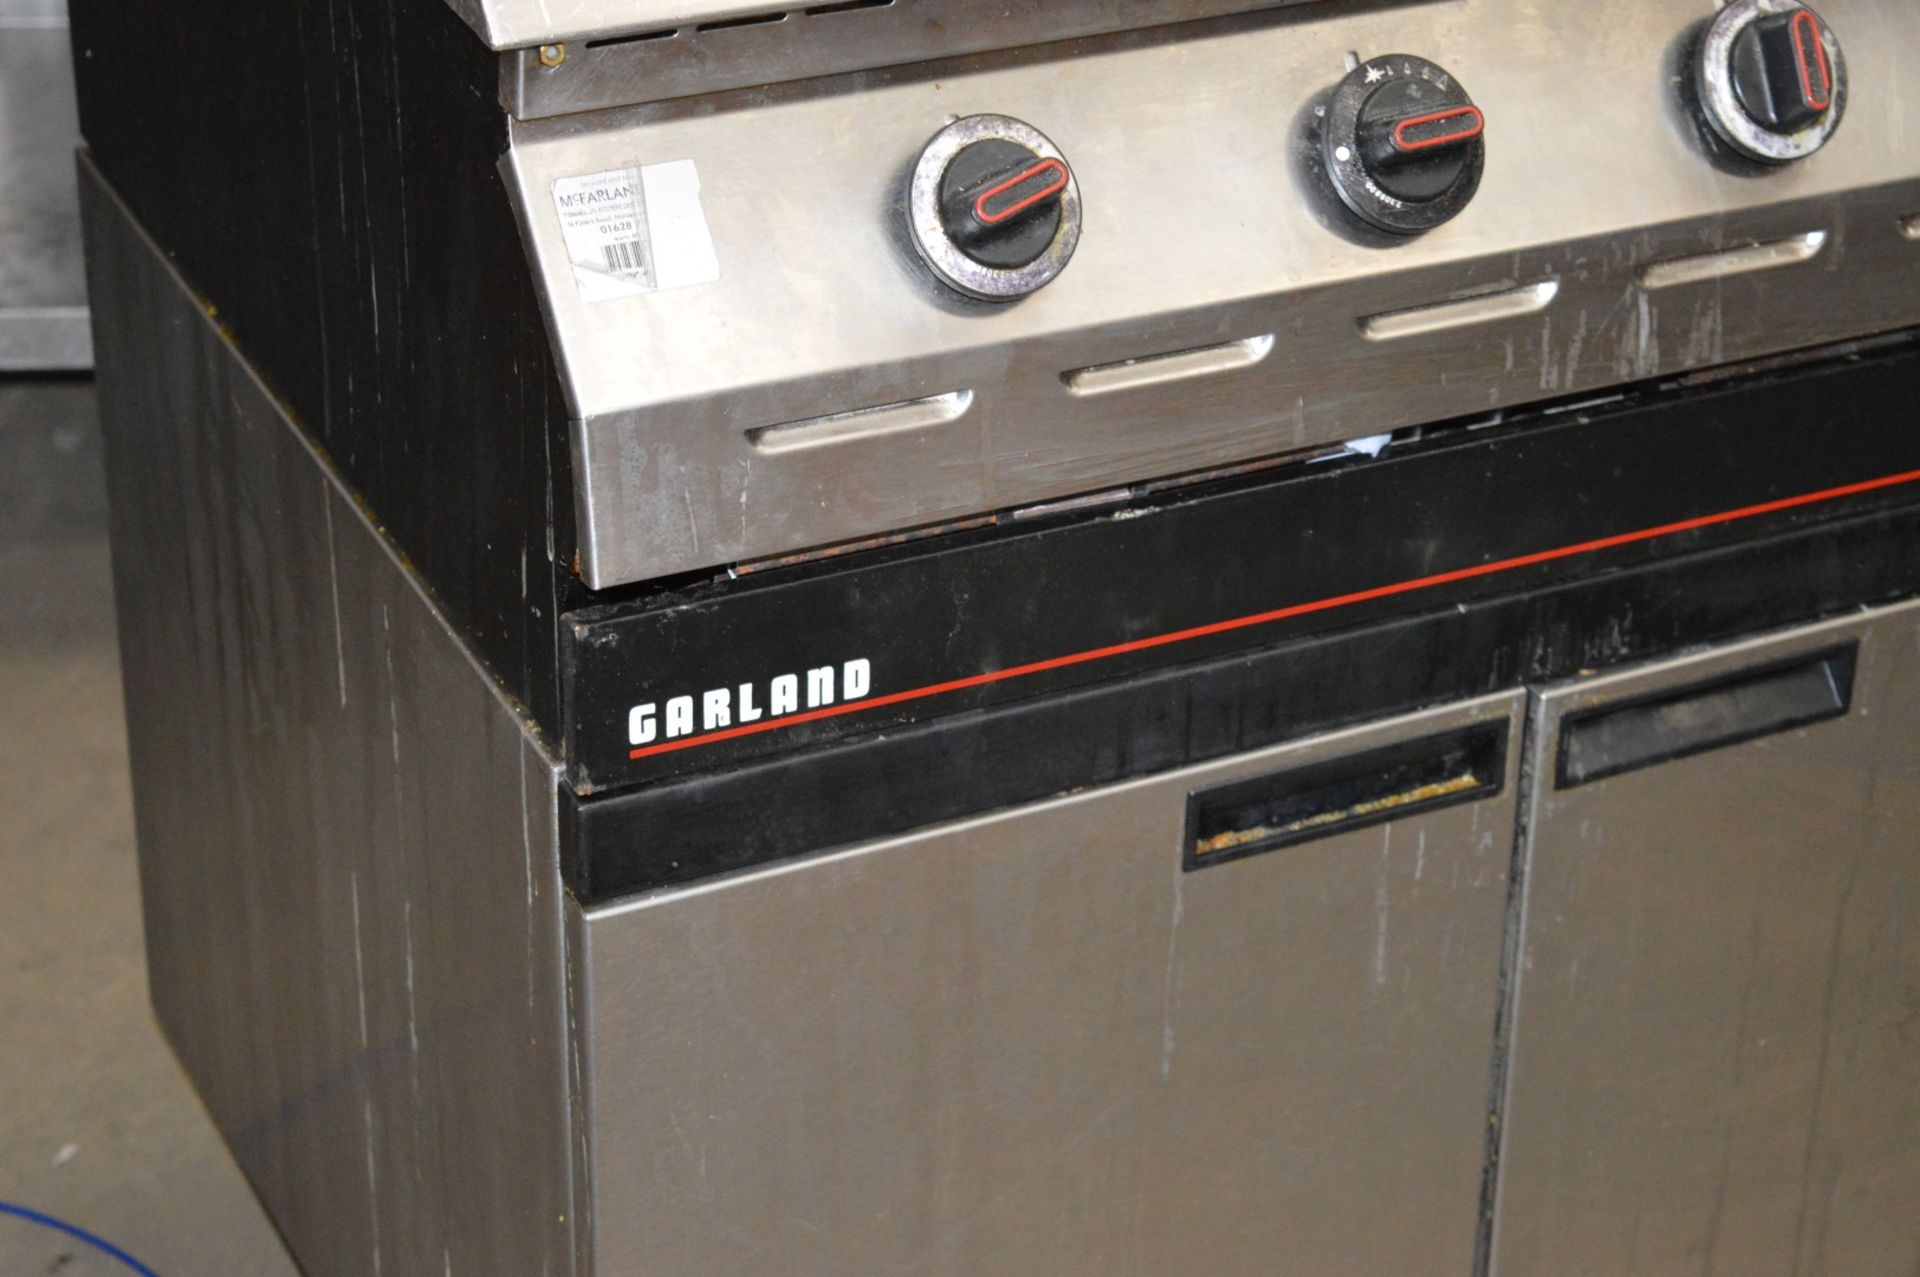 1 x Garland Commercial Range Cooker - Four Gas Burners - On Castors - Suitable For Professional - Image 4 of 8